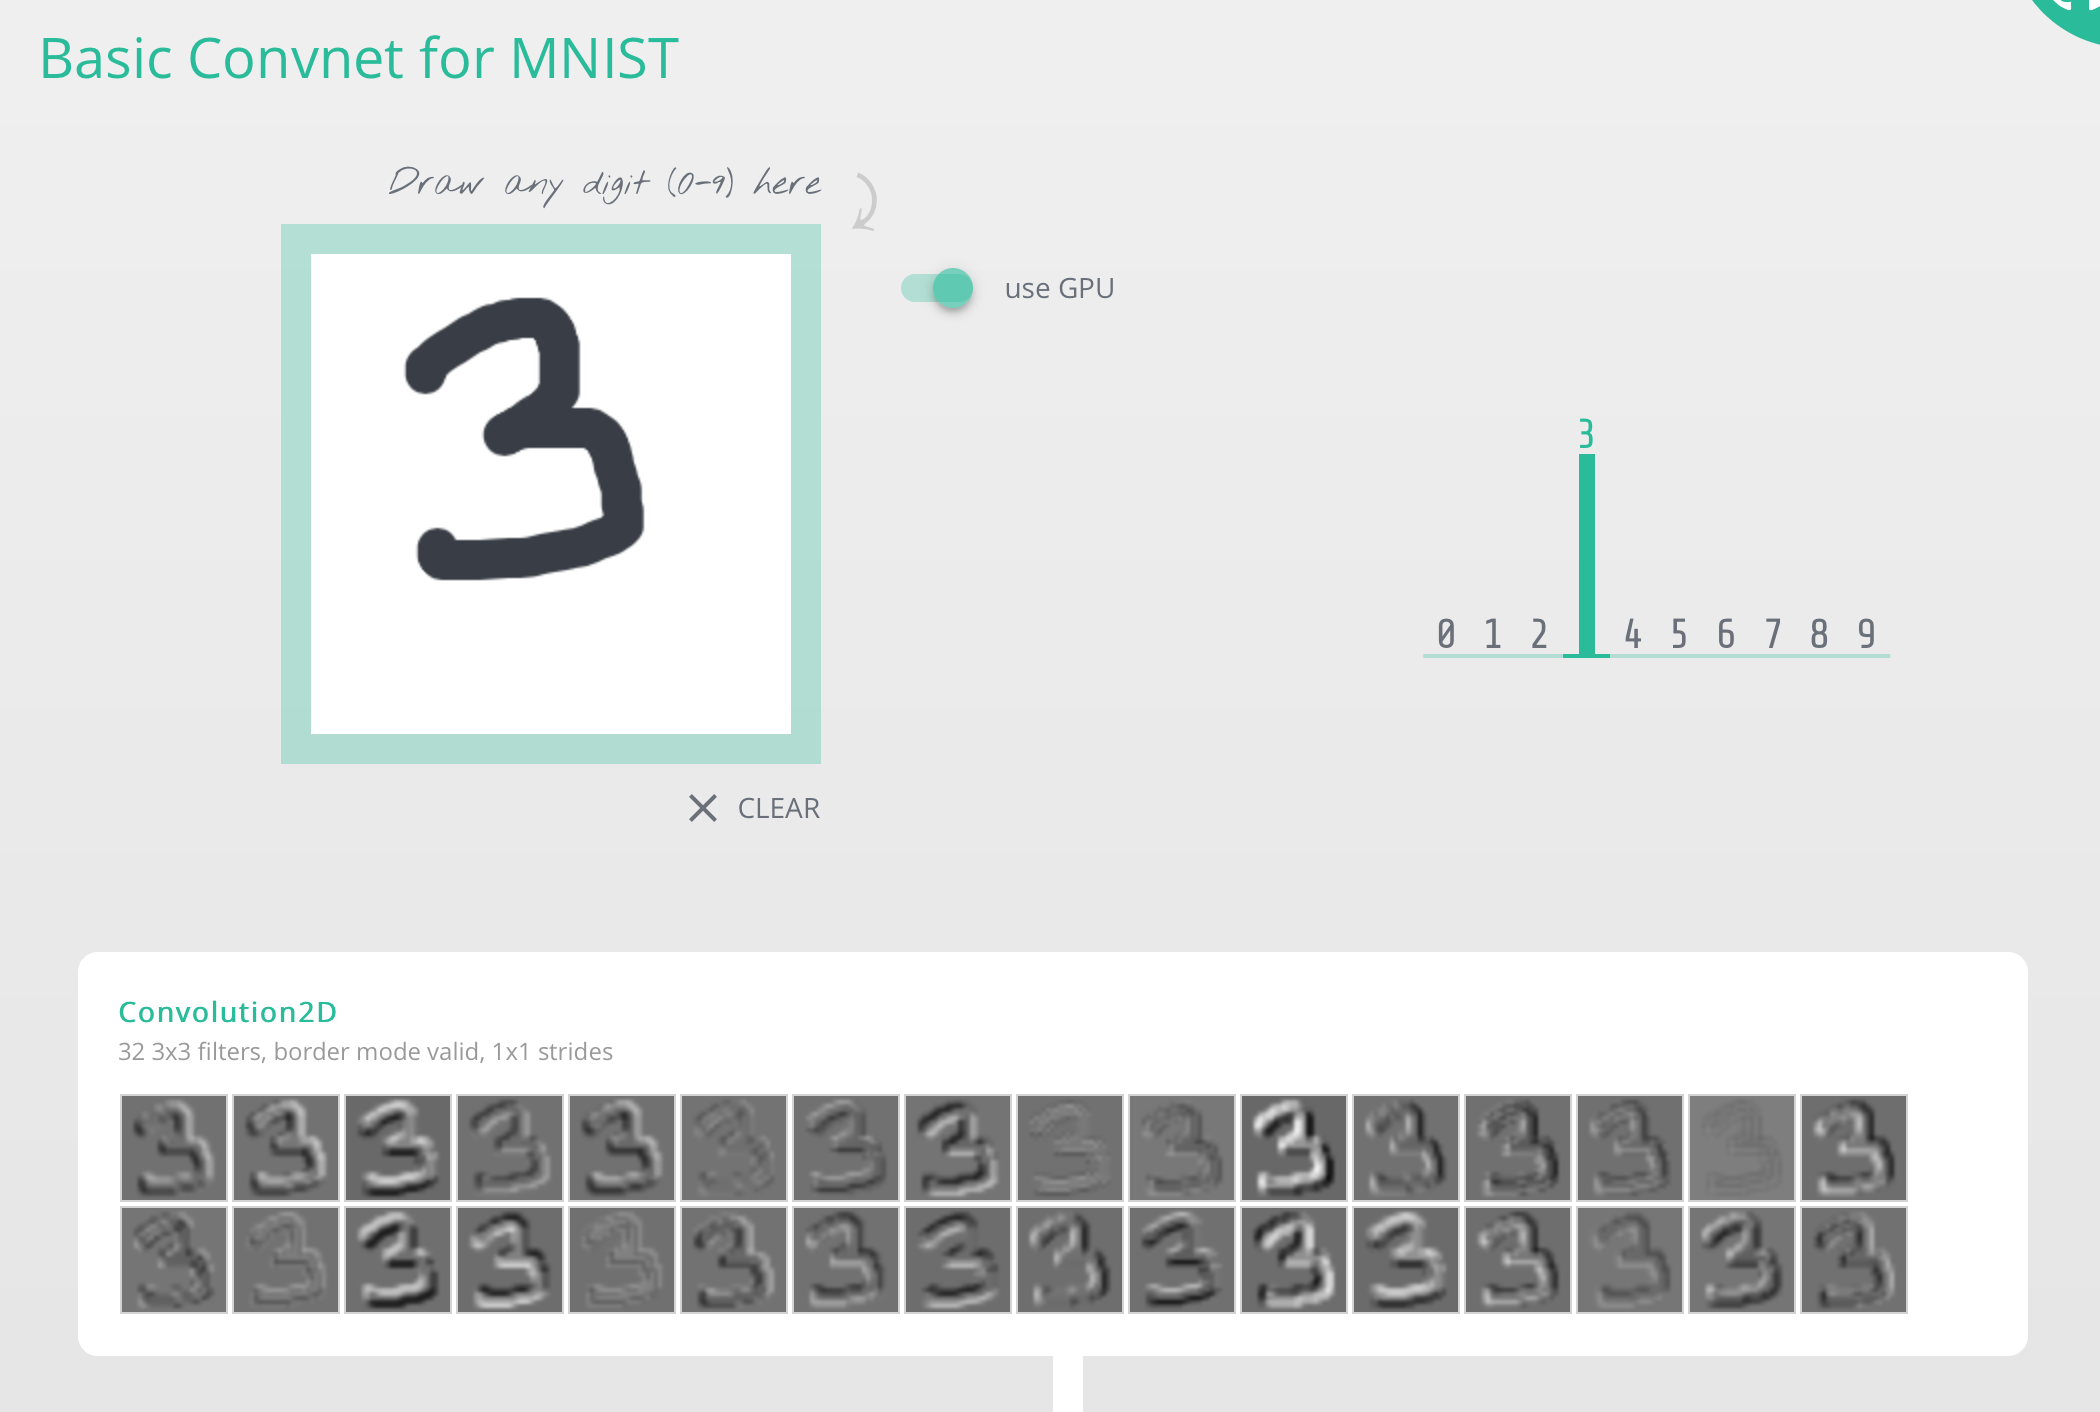 Better understanding what a convnet-based classifier does with the MNIST data